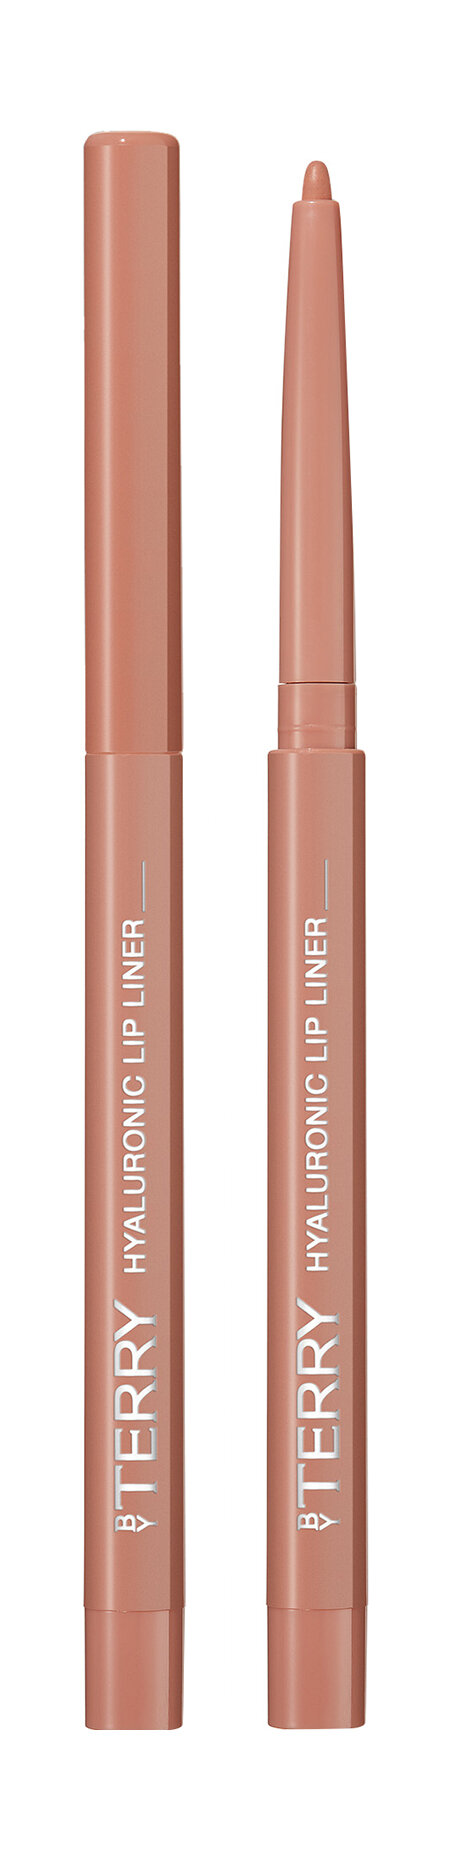 BY TERRY Hyaluronic Lip Liner Карандаш для губ, 0,3 г, 1. Sexy Nude